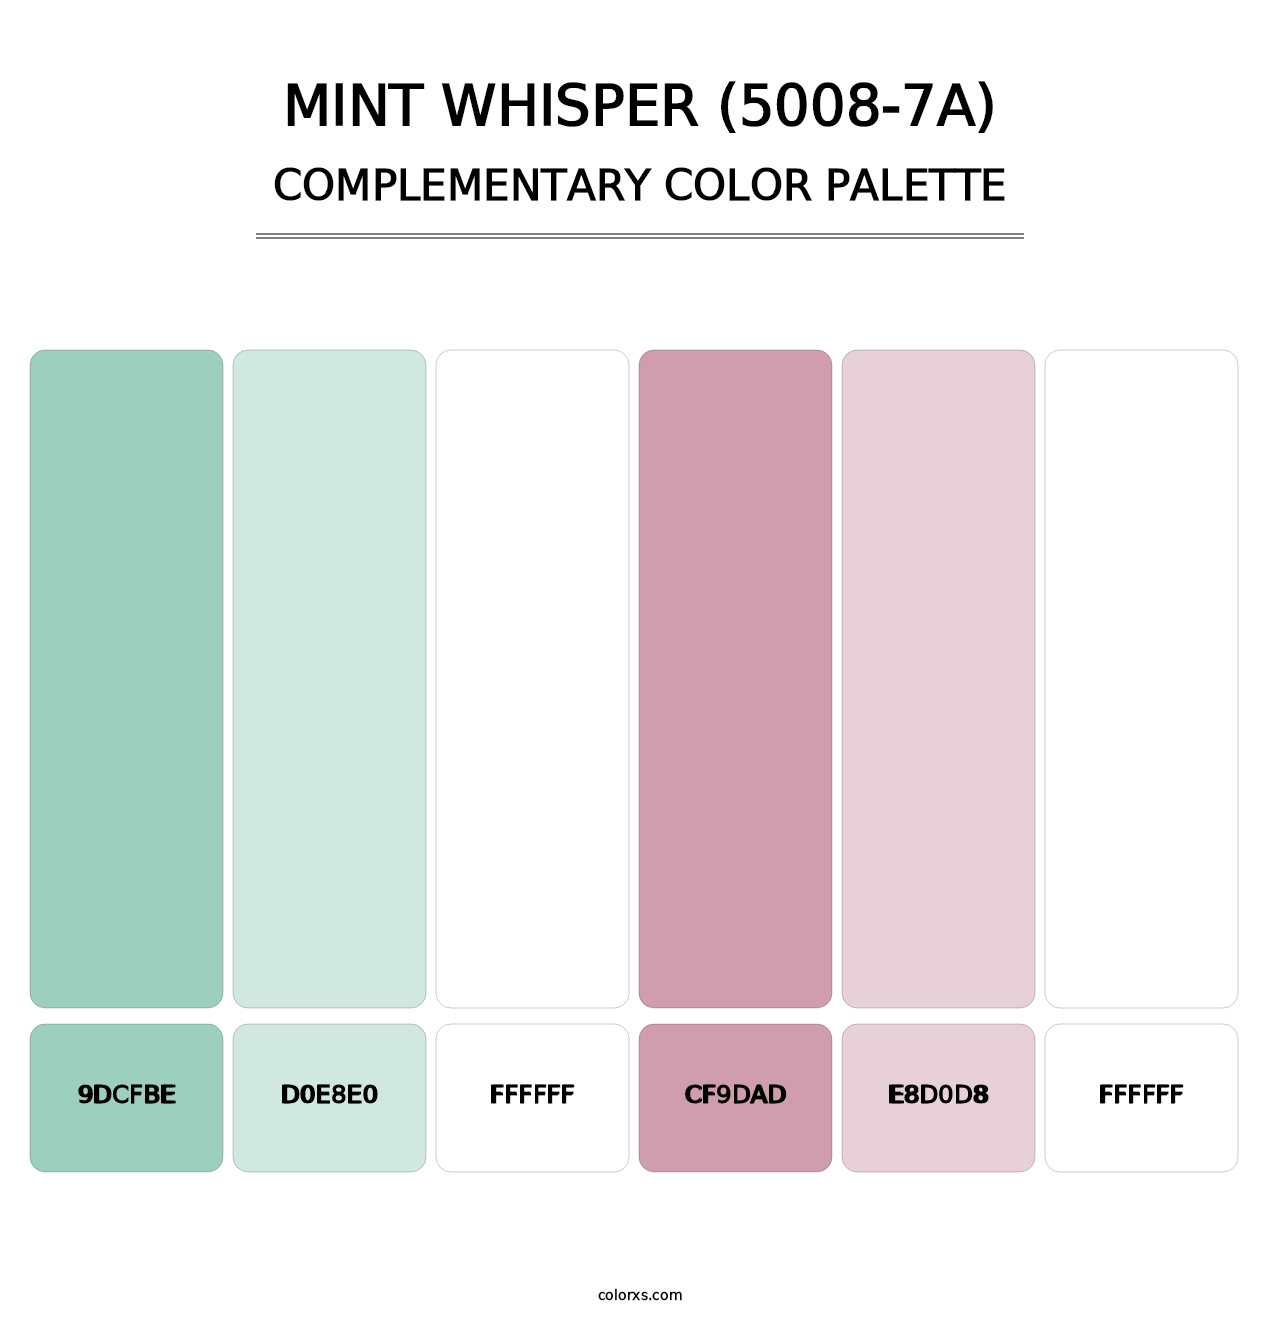 Mint Whisper (5008-7A) - Complementary Color Palette